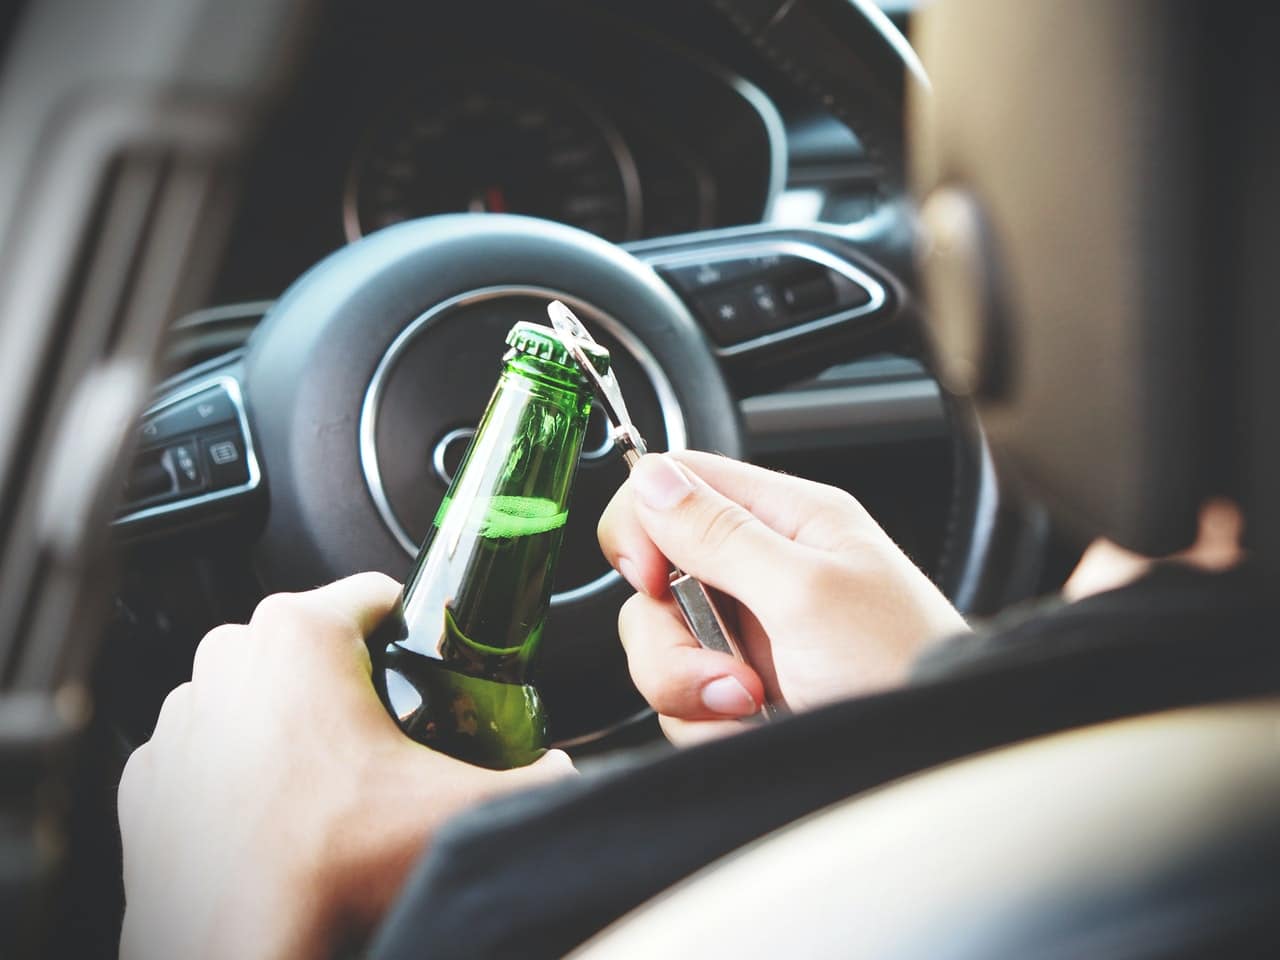 A man opening a bottle of beer about to go drink driving